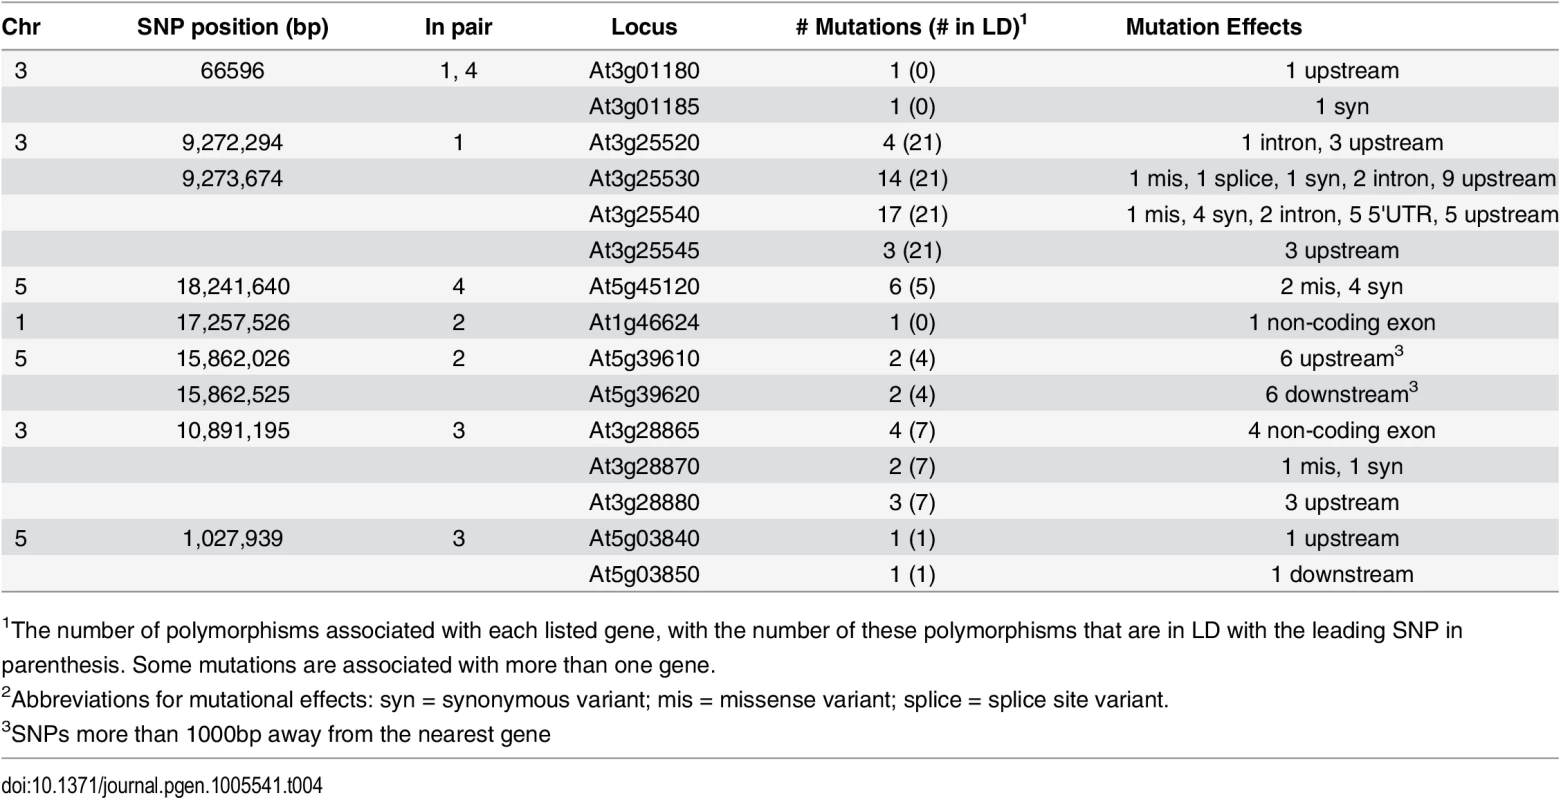 Summary of identified polymorphisms in LD with the leading SNPs from the epistatic GWA analysis.